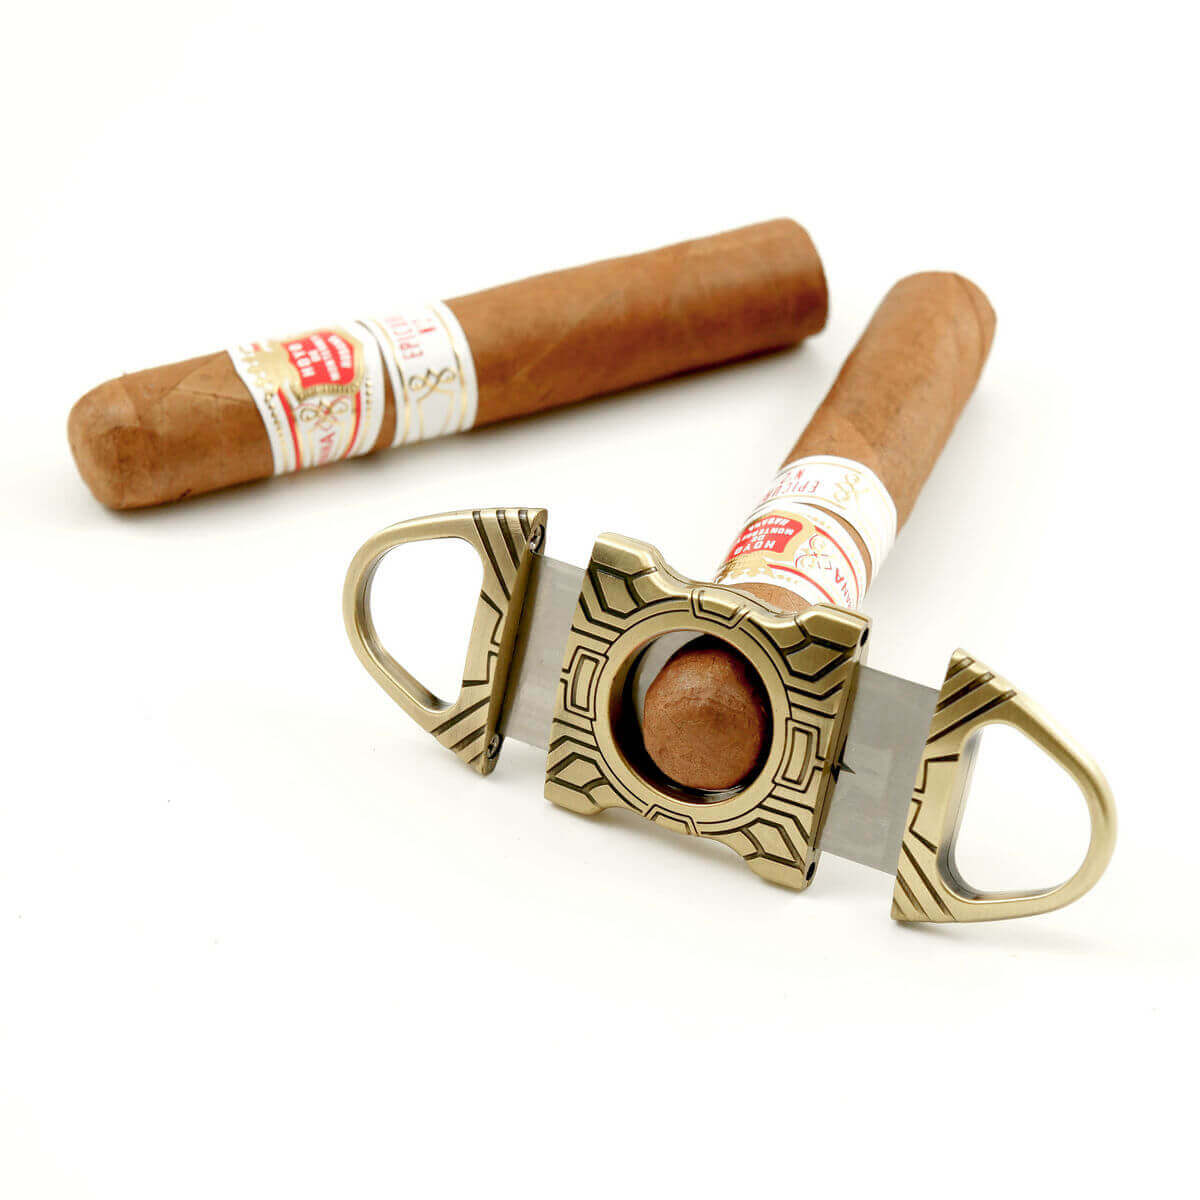 What is the best cigar cutter?